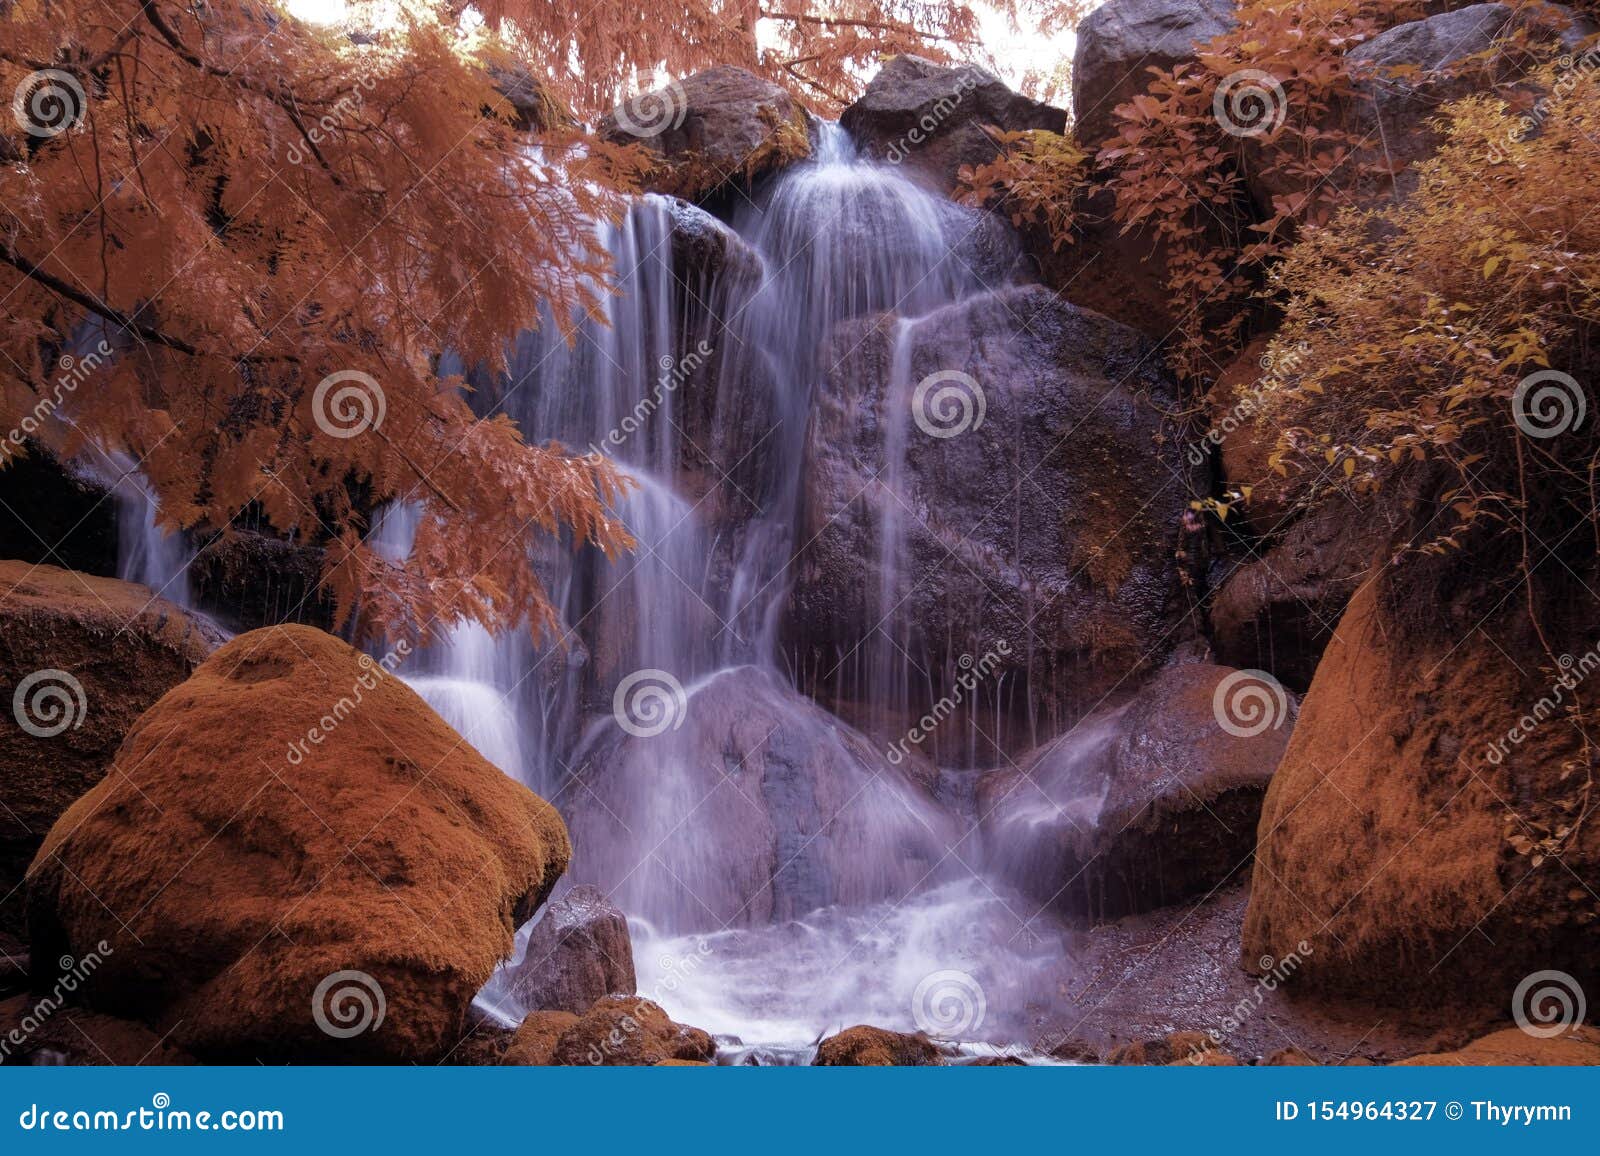 waterfall photographed in infrared